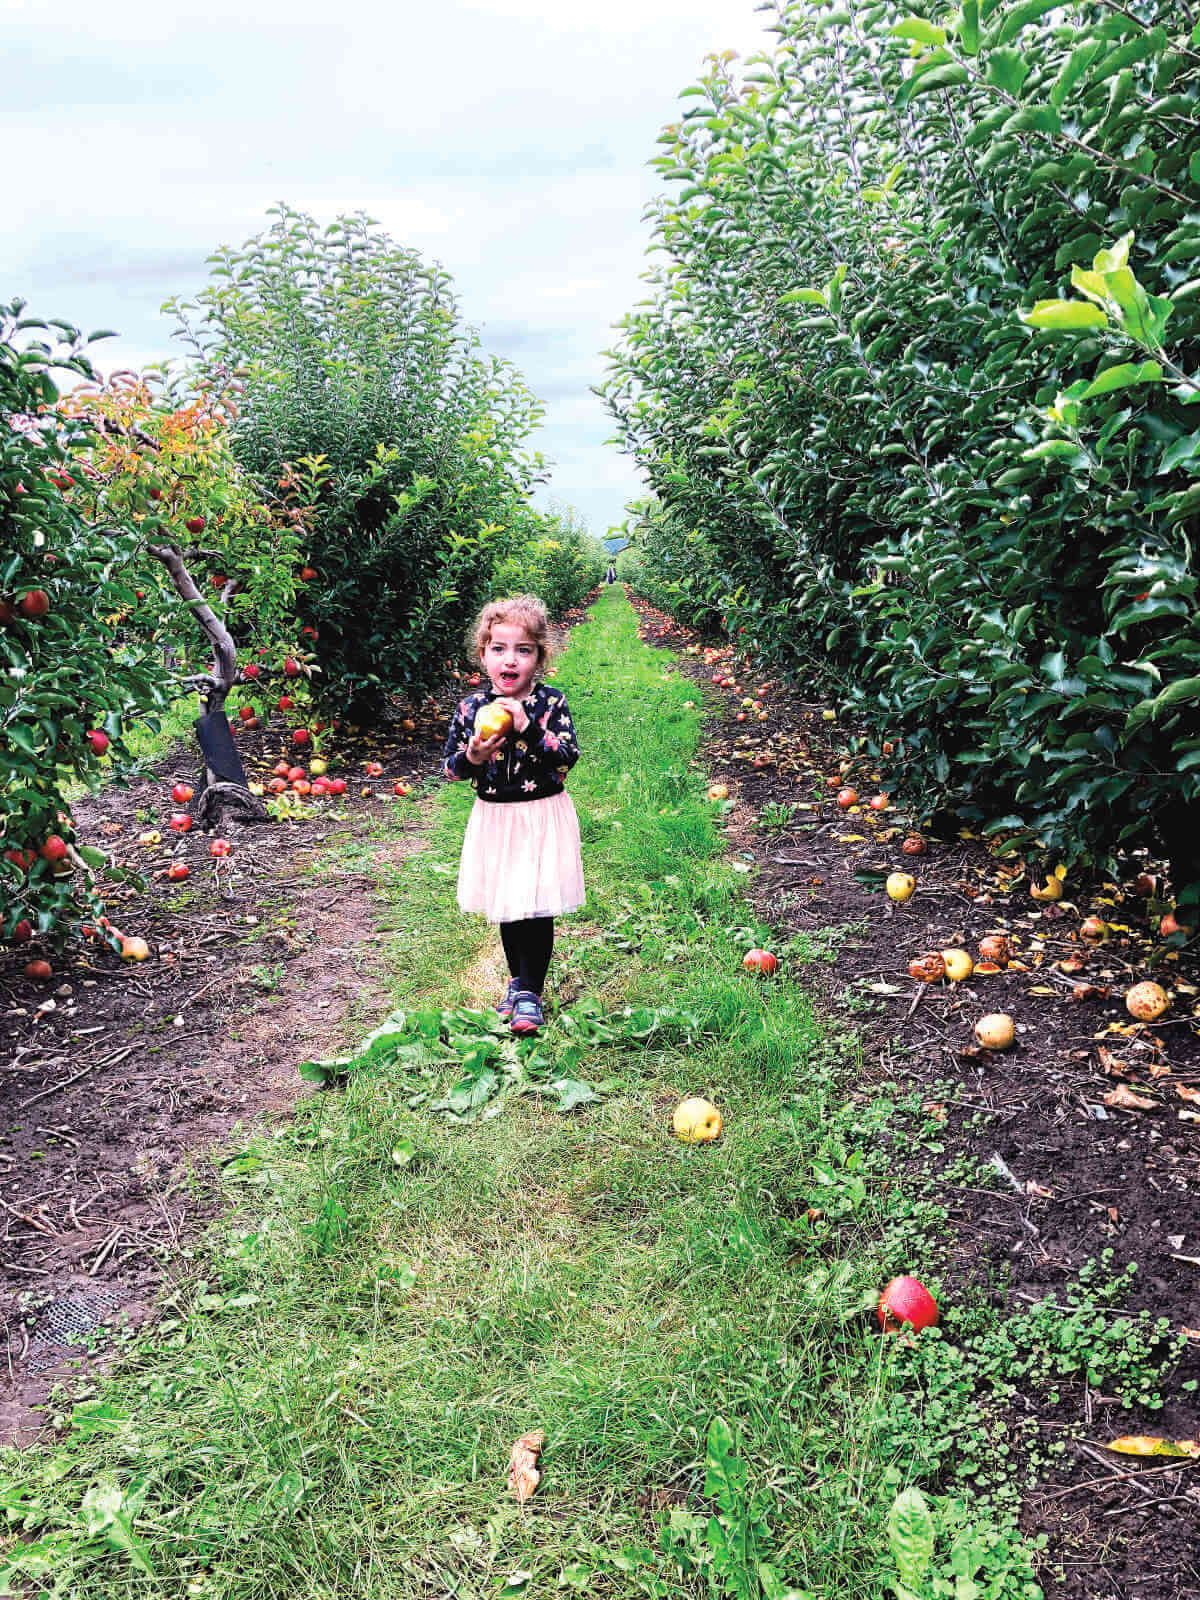 Let’s Go to the Apple Orchard!